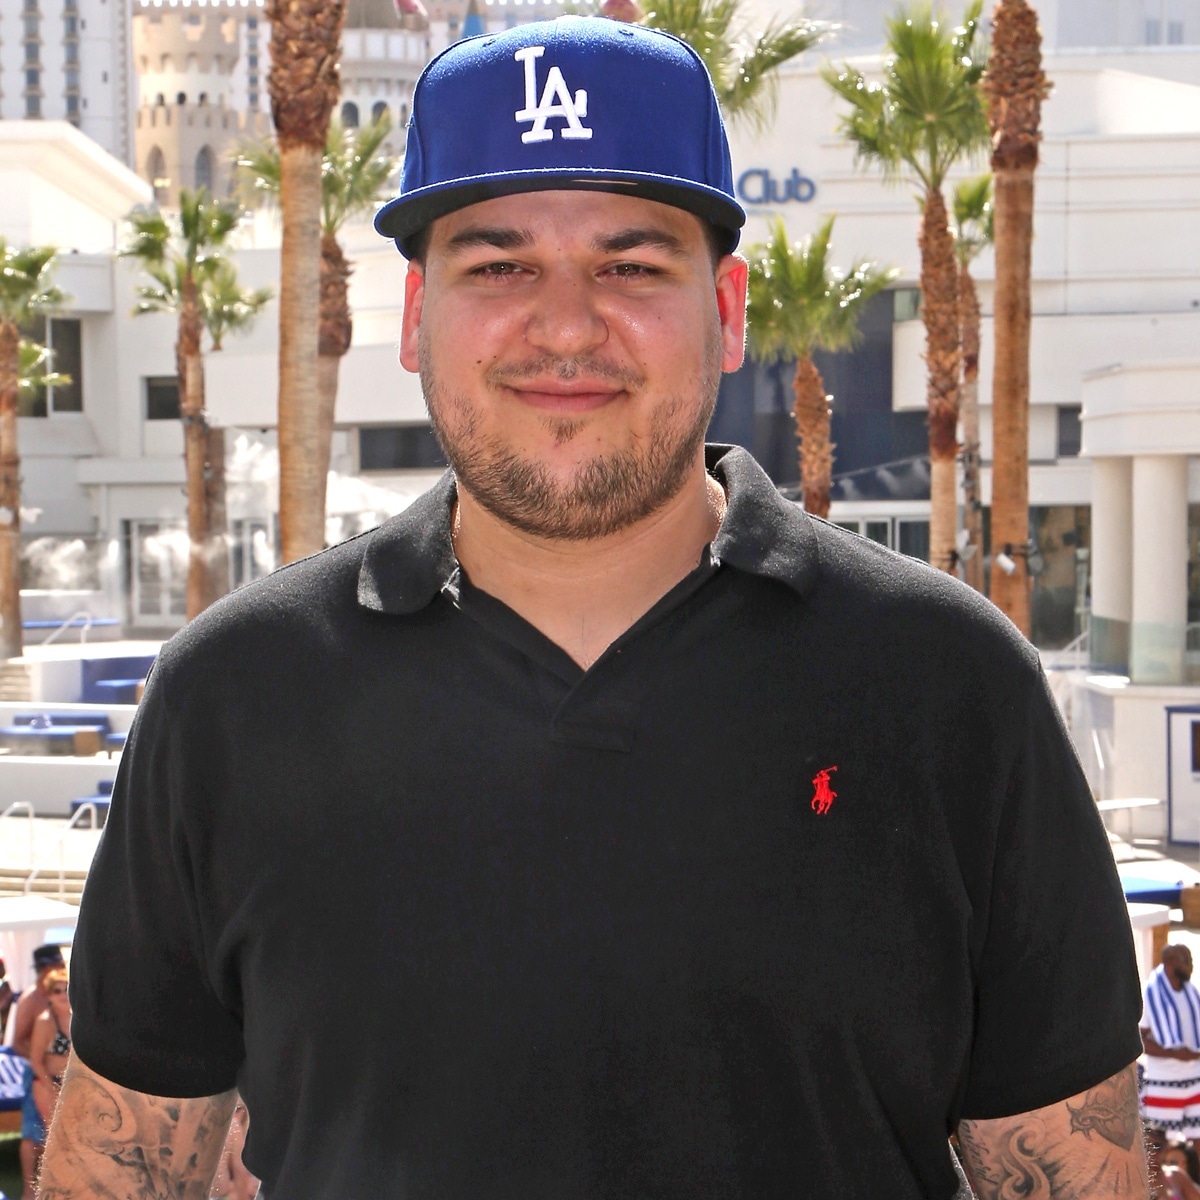 How Rob Kardashian Turned His Life Around To Become His Best Self